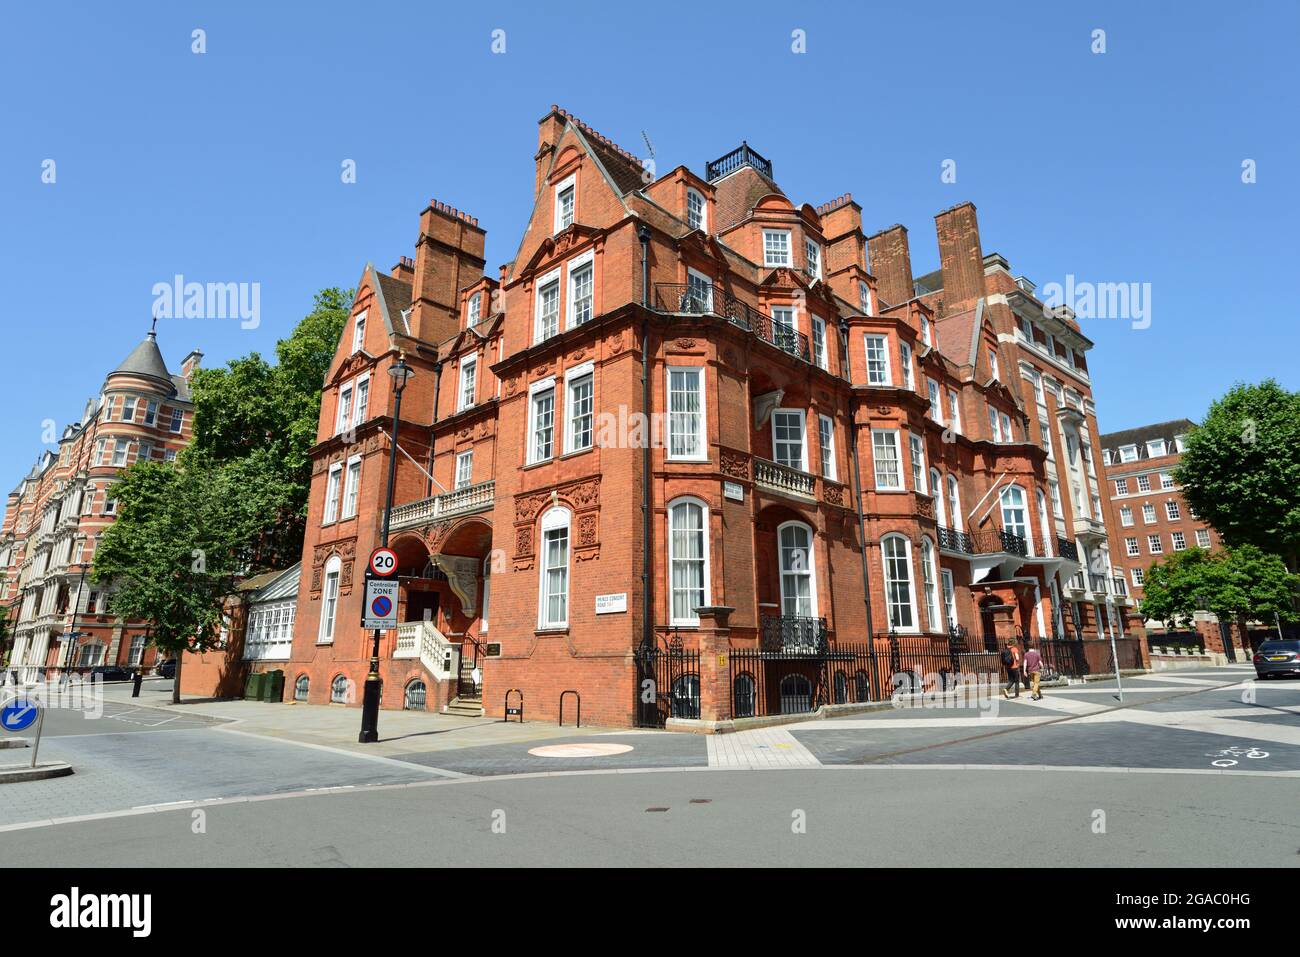 Jamaican High Commission (Jamaican Embassy), Prince Consort Road, South Kensington, West London, United Kingdom Stock Photo